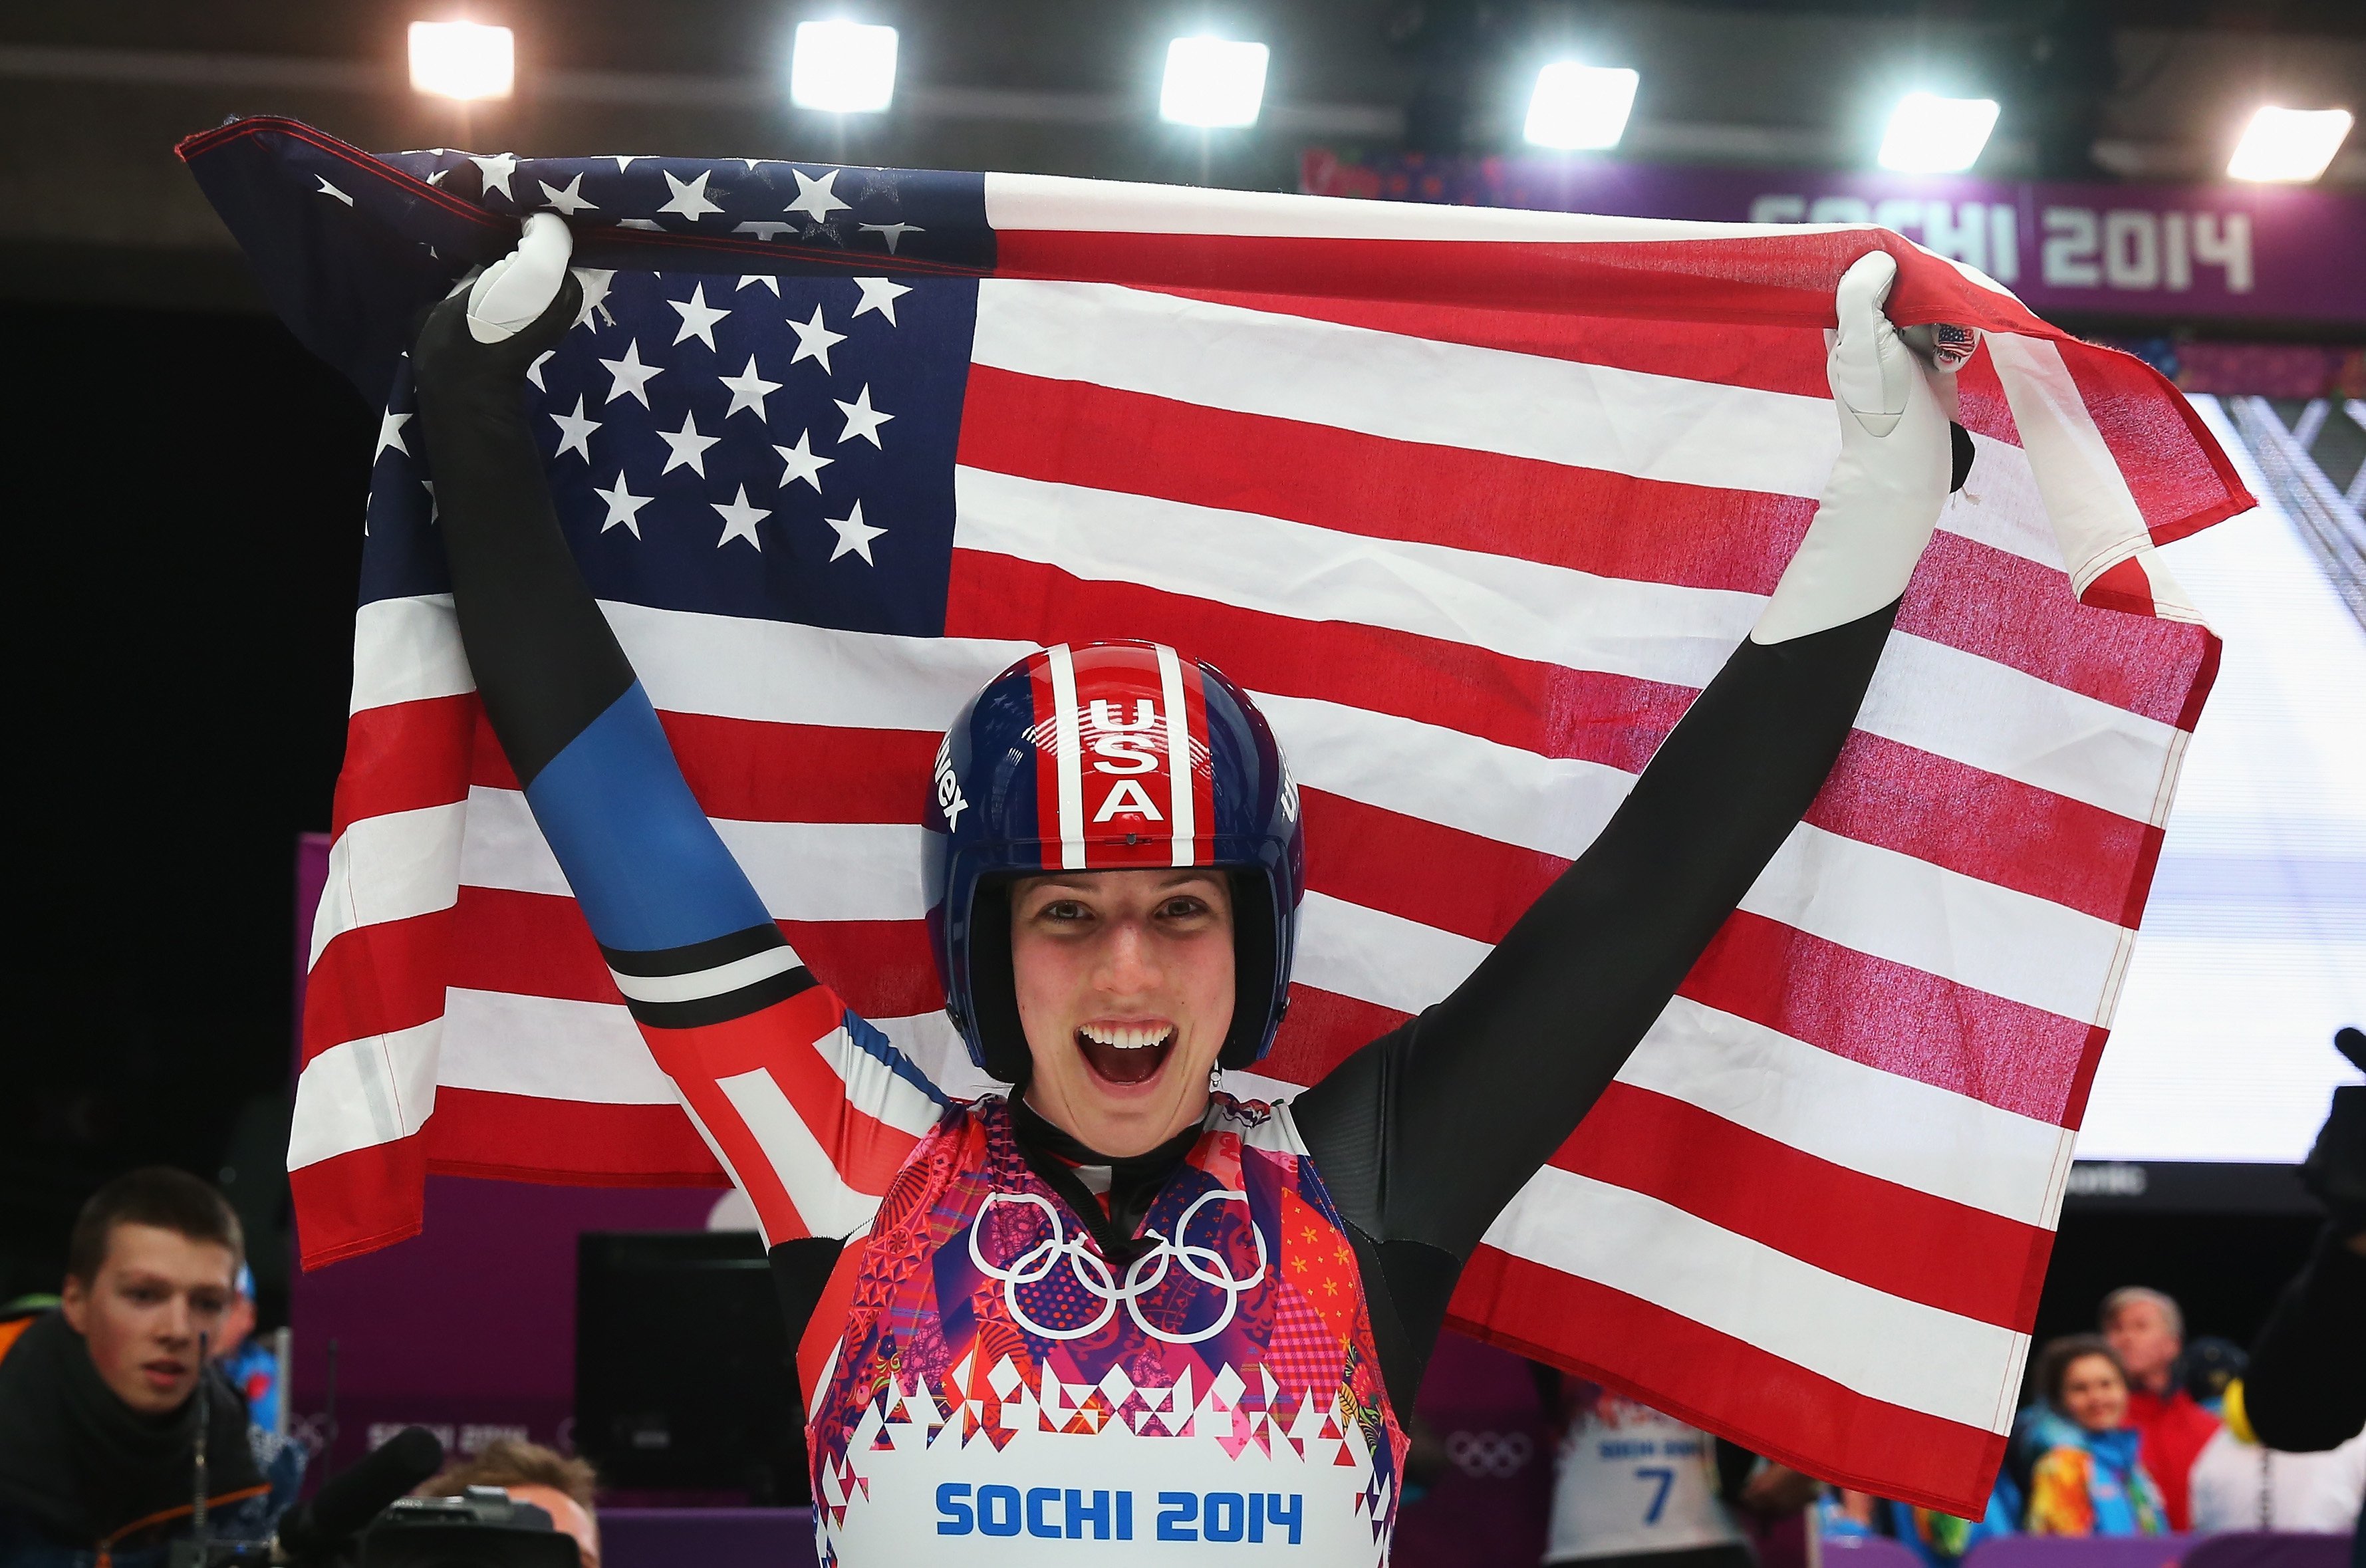 Erin Hamlin of the United States celebrates winning bronze medal in the Women's Luge Singles on Day 4 of the Sochi 2014 Winter Olympics at Sliding Center Sanki on February 11, 2014 in Sochi, Russia. (Alexander Hassenstein—Getty Images) (Alexander Hassenstein—Getty Images))